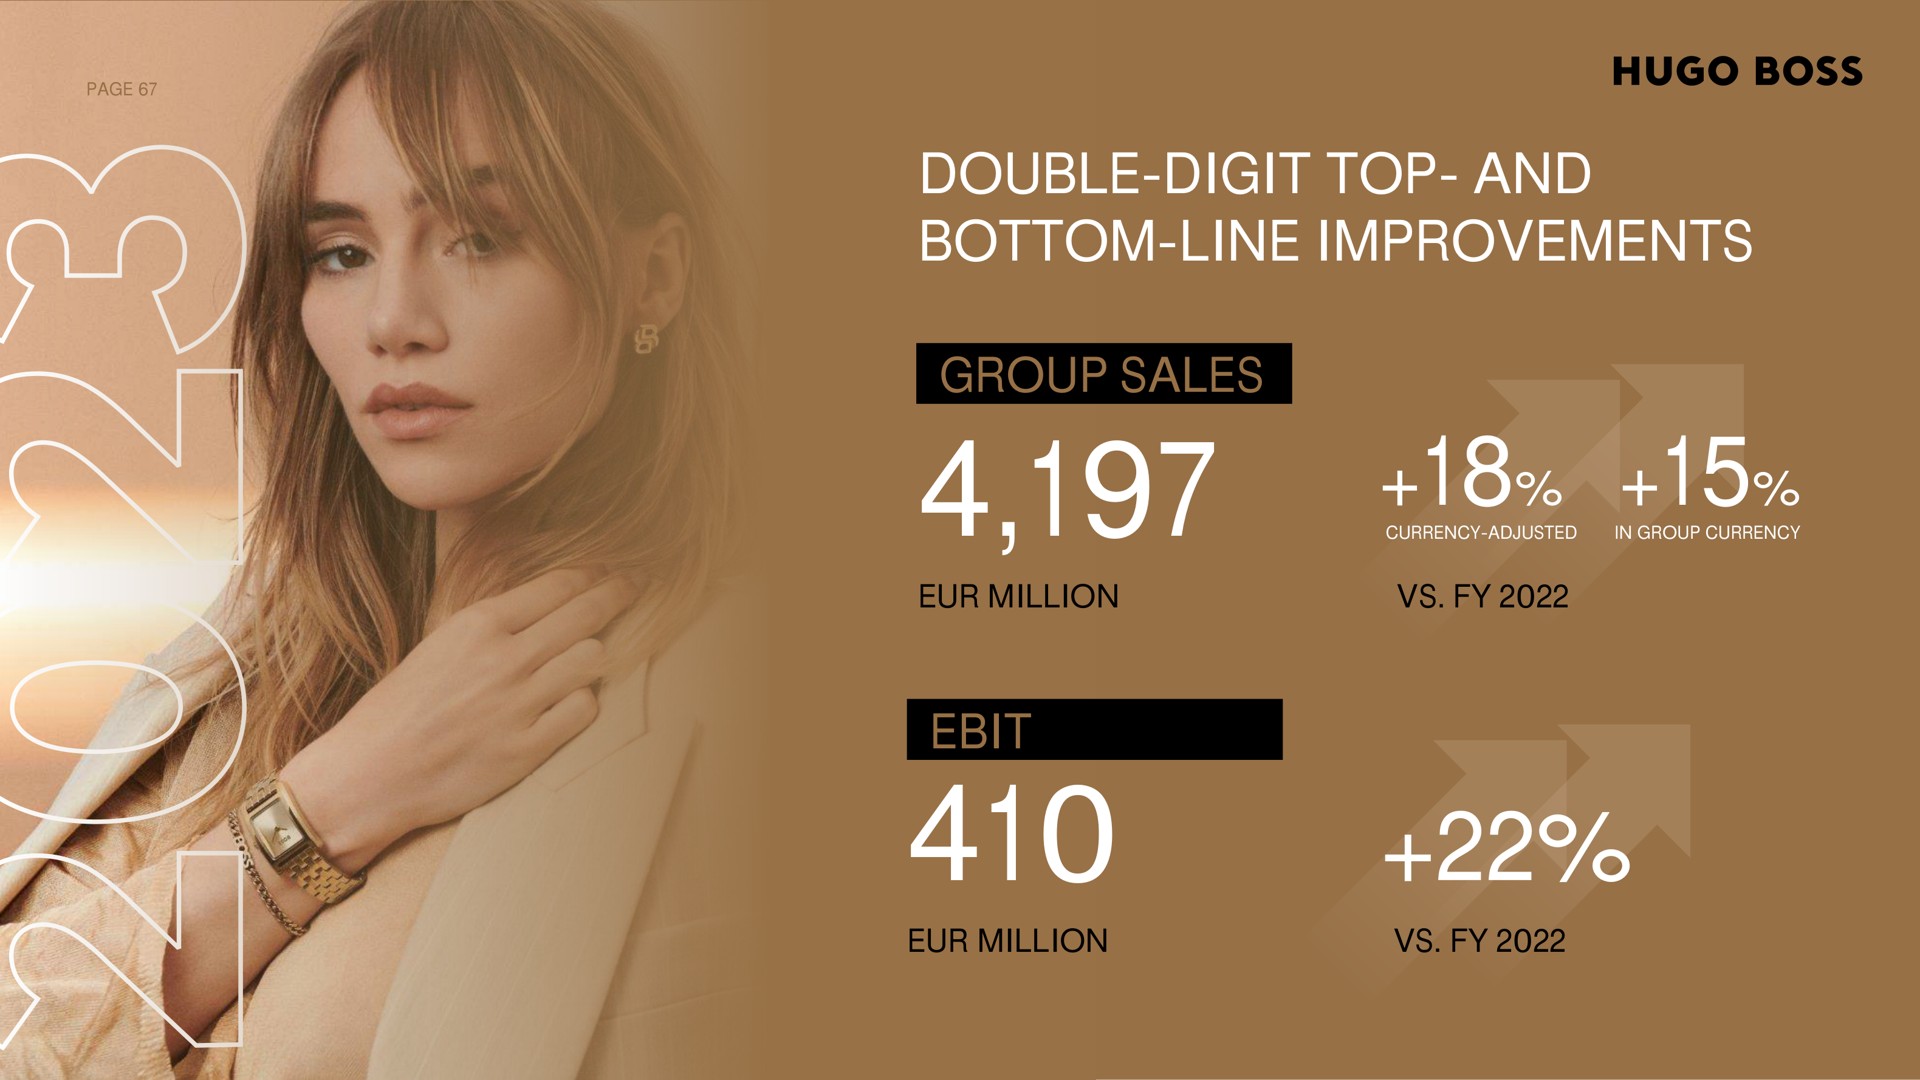 double digit top and bottom line improvements group sales ake aas mate | Hugo Boss